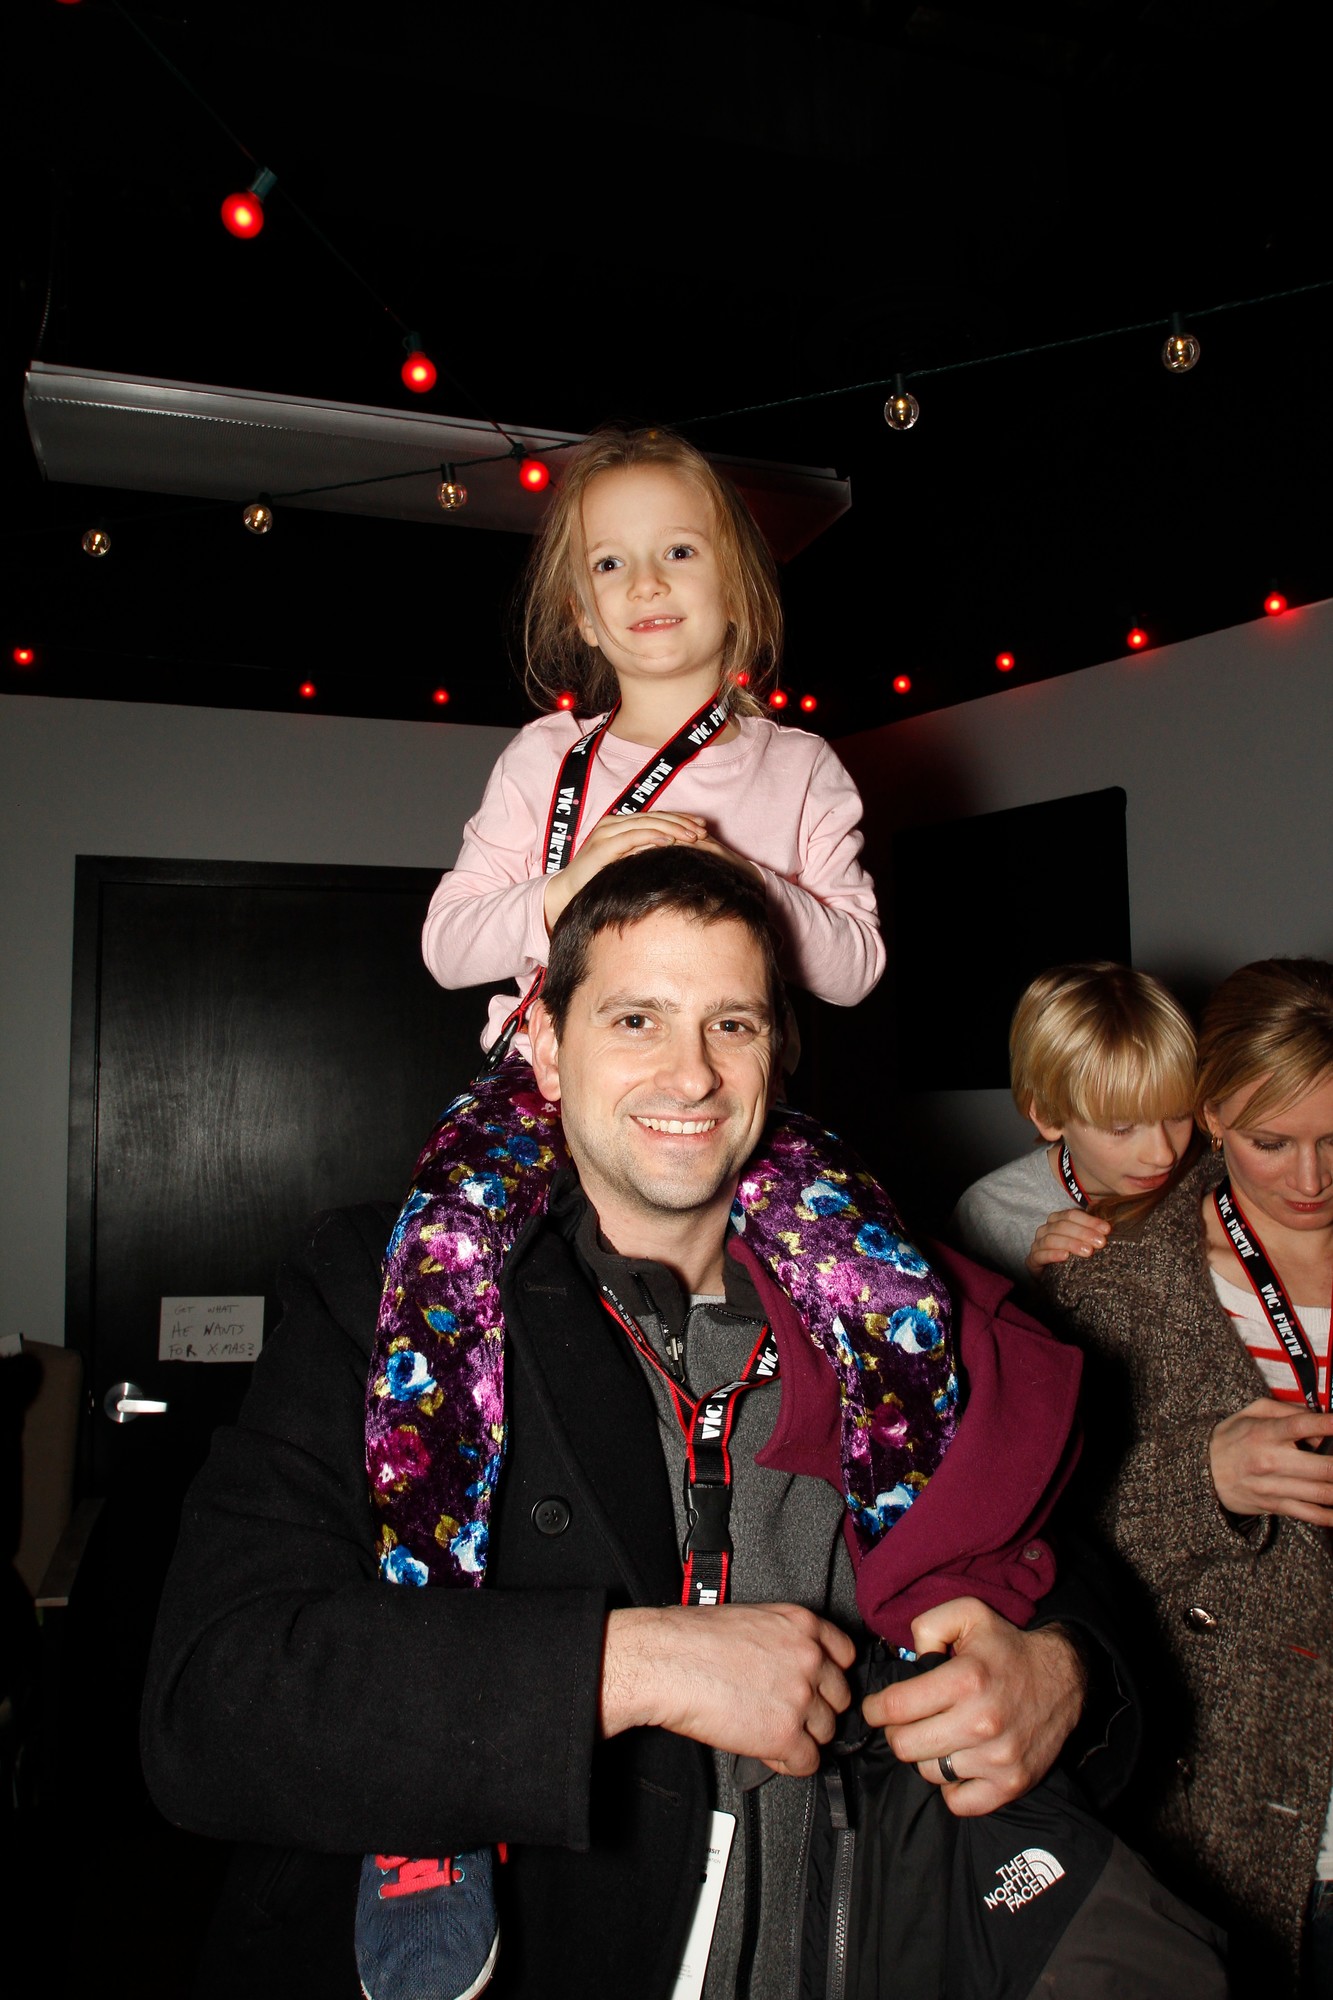 Elizabeth Hagan, 6, enjoyed the best seat in the house atop her dad, Brian.